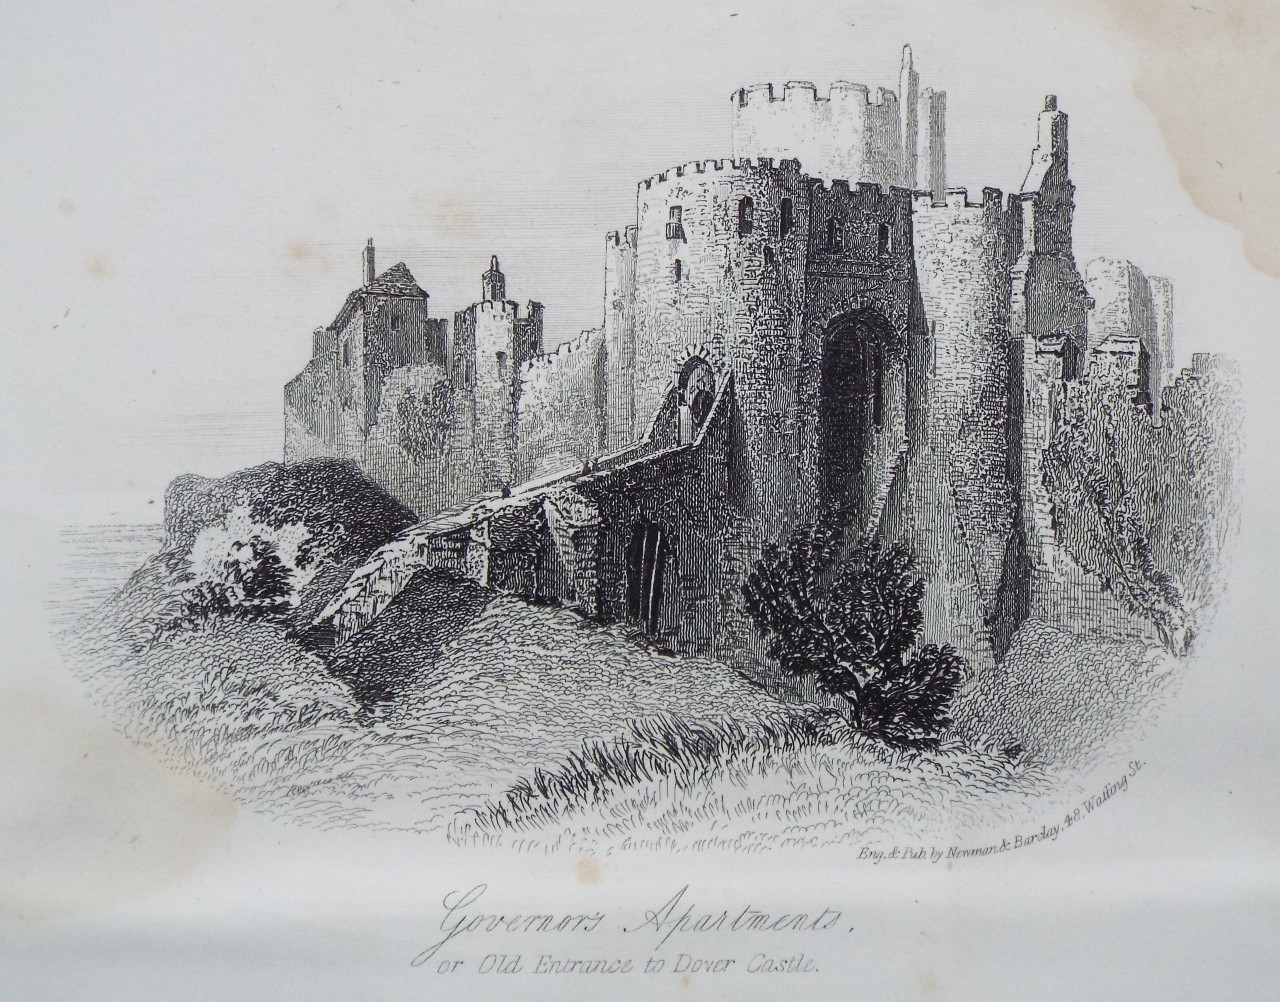 Steel Vignette - Governor's Apartments, or Old Entrance to Dover Castle. - Newman